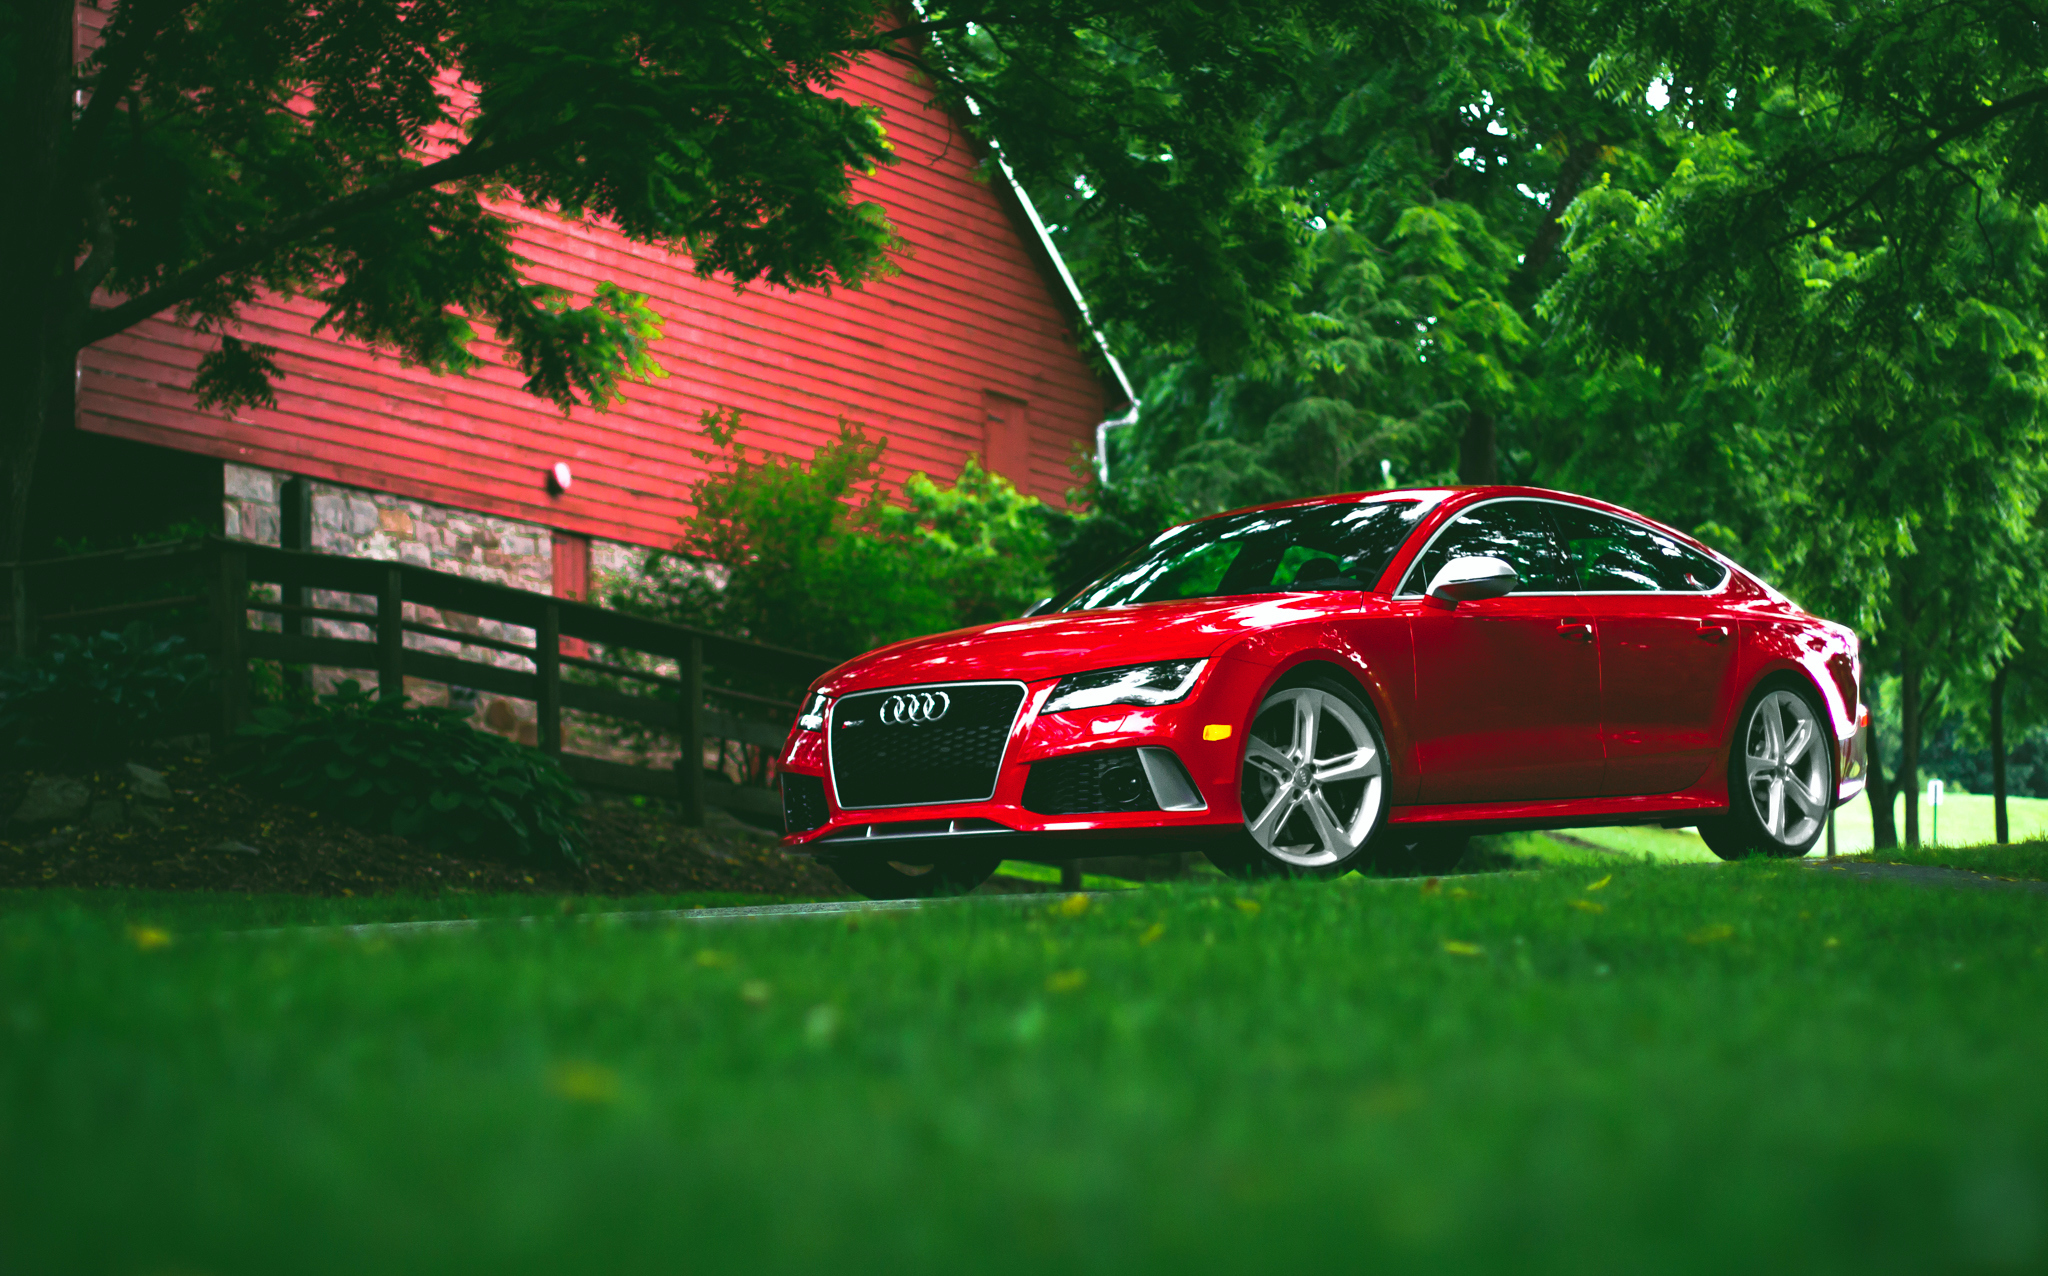 side view, audi, red, grass, cars, rs7 cellphone